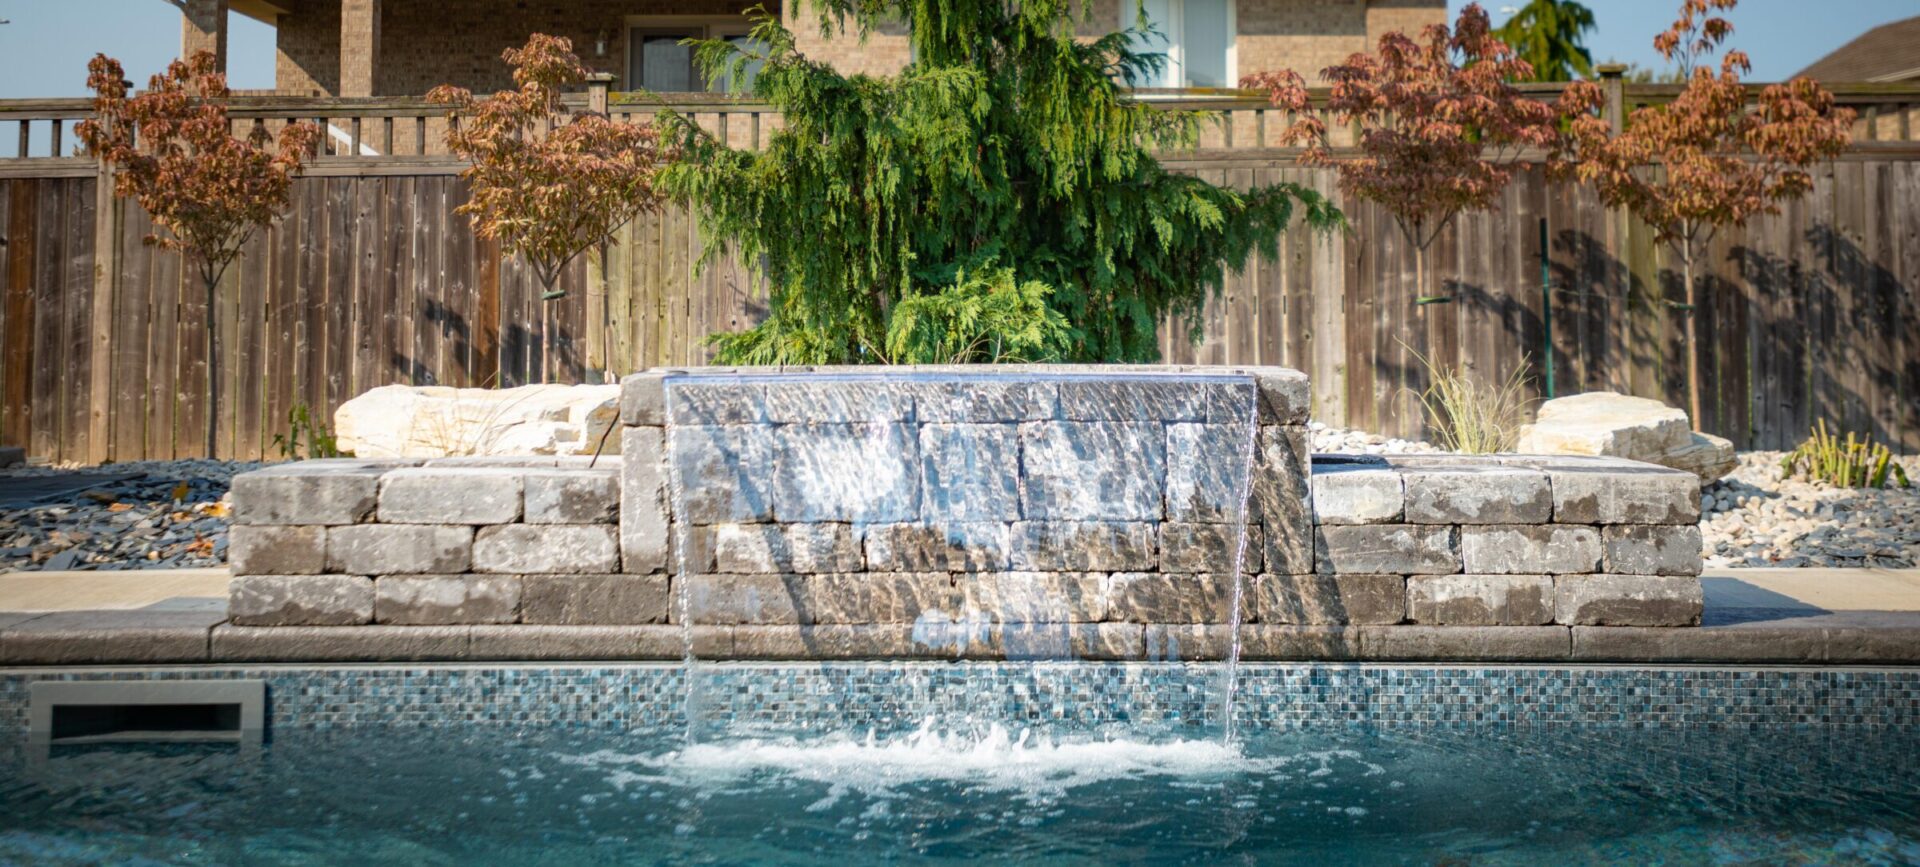 This image features an outdoor swimming pool with a stone waterfall feature, surrounded by a wooden fence and landscaping under a clear sky.